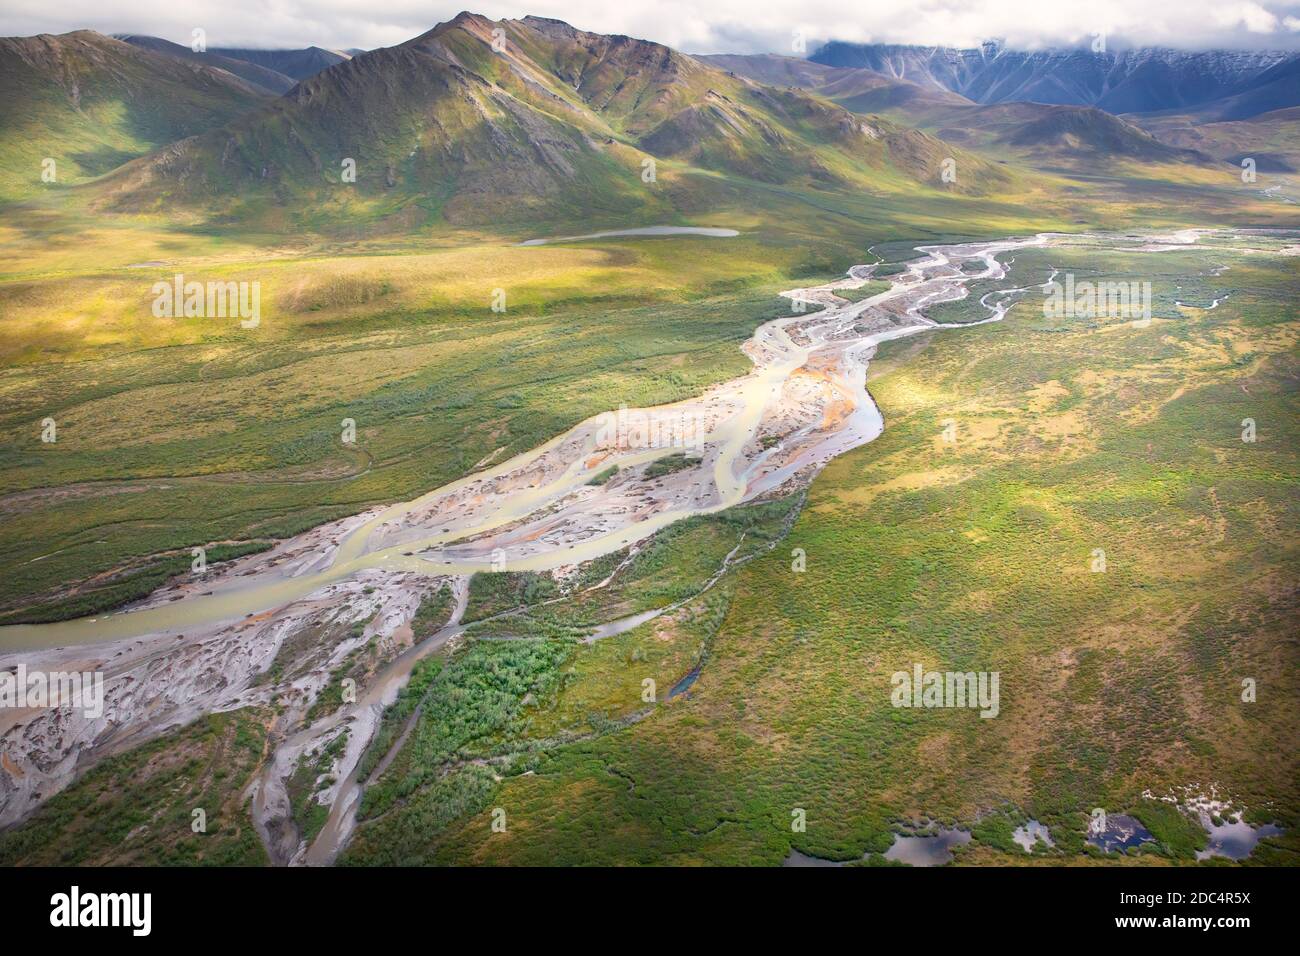 Aerial view of a glacial river valley and the Brooks Range at the Arctic National Wildlife Refuge in Northeastern Alaska. The remote Arctic National Wildlife Refuge covers approximately 19.64 million acres of land and is the largest wilderness in the United States. Stock Photo